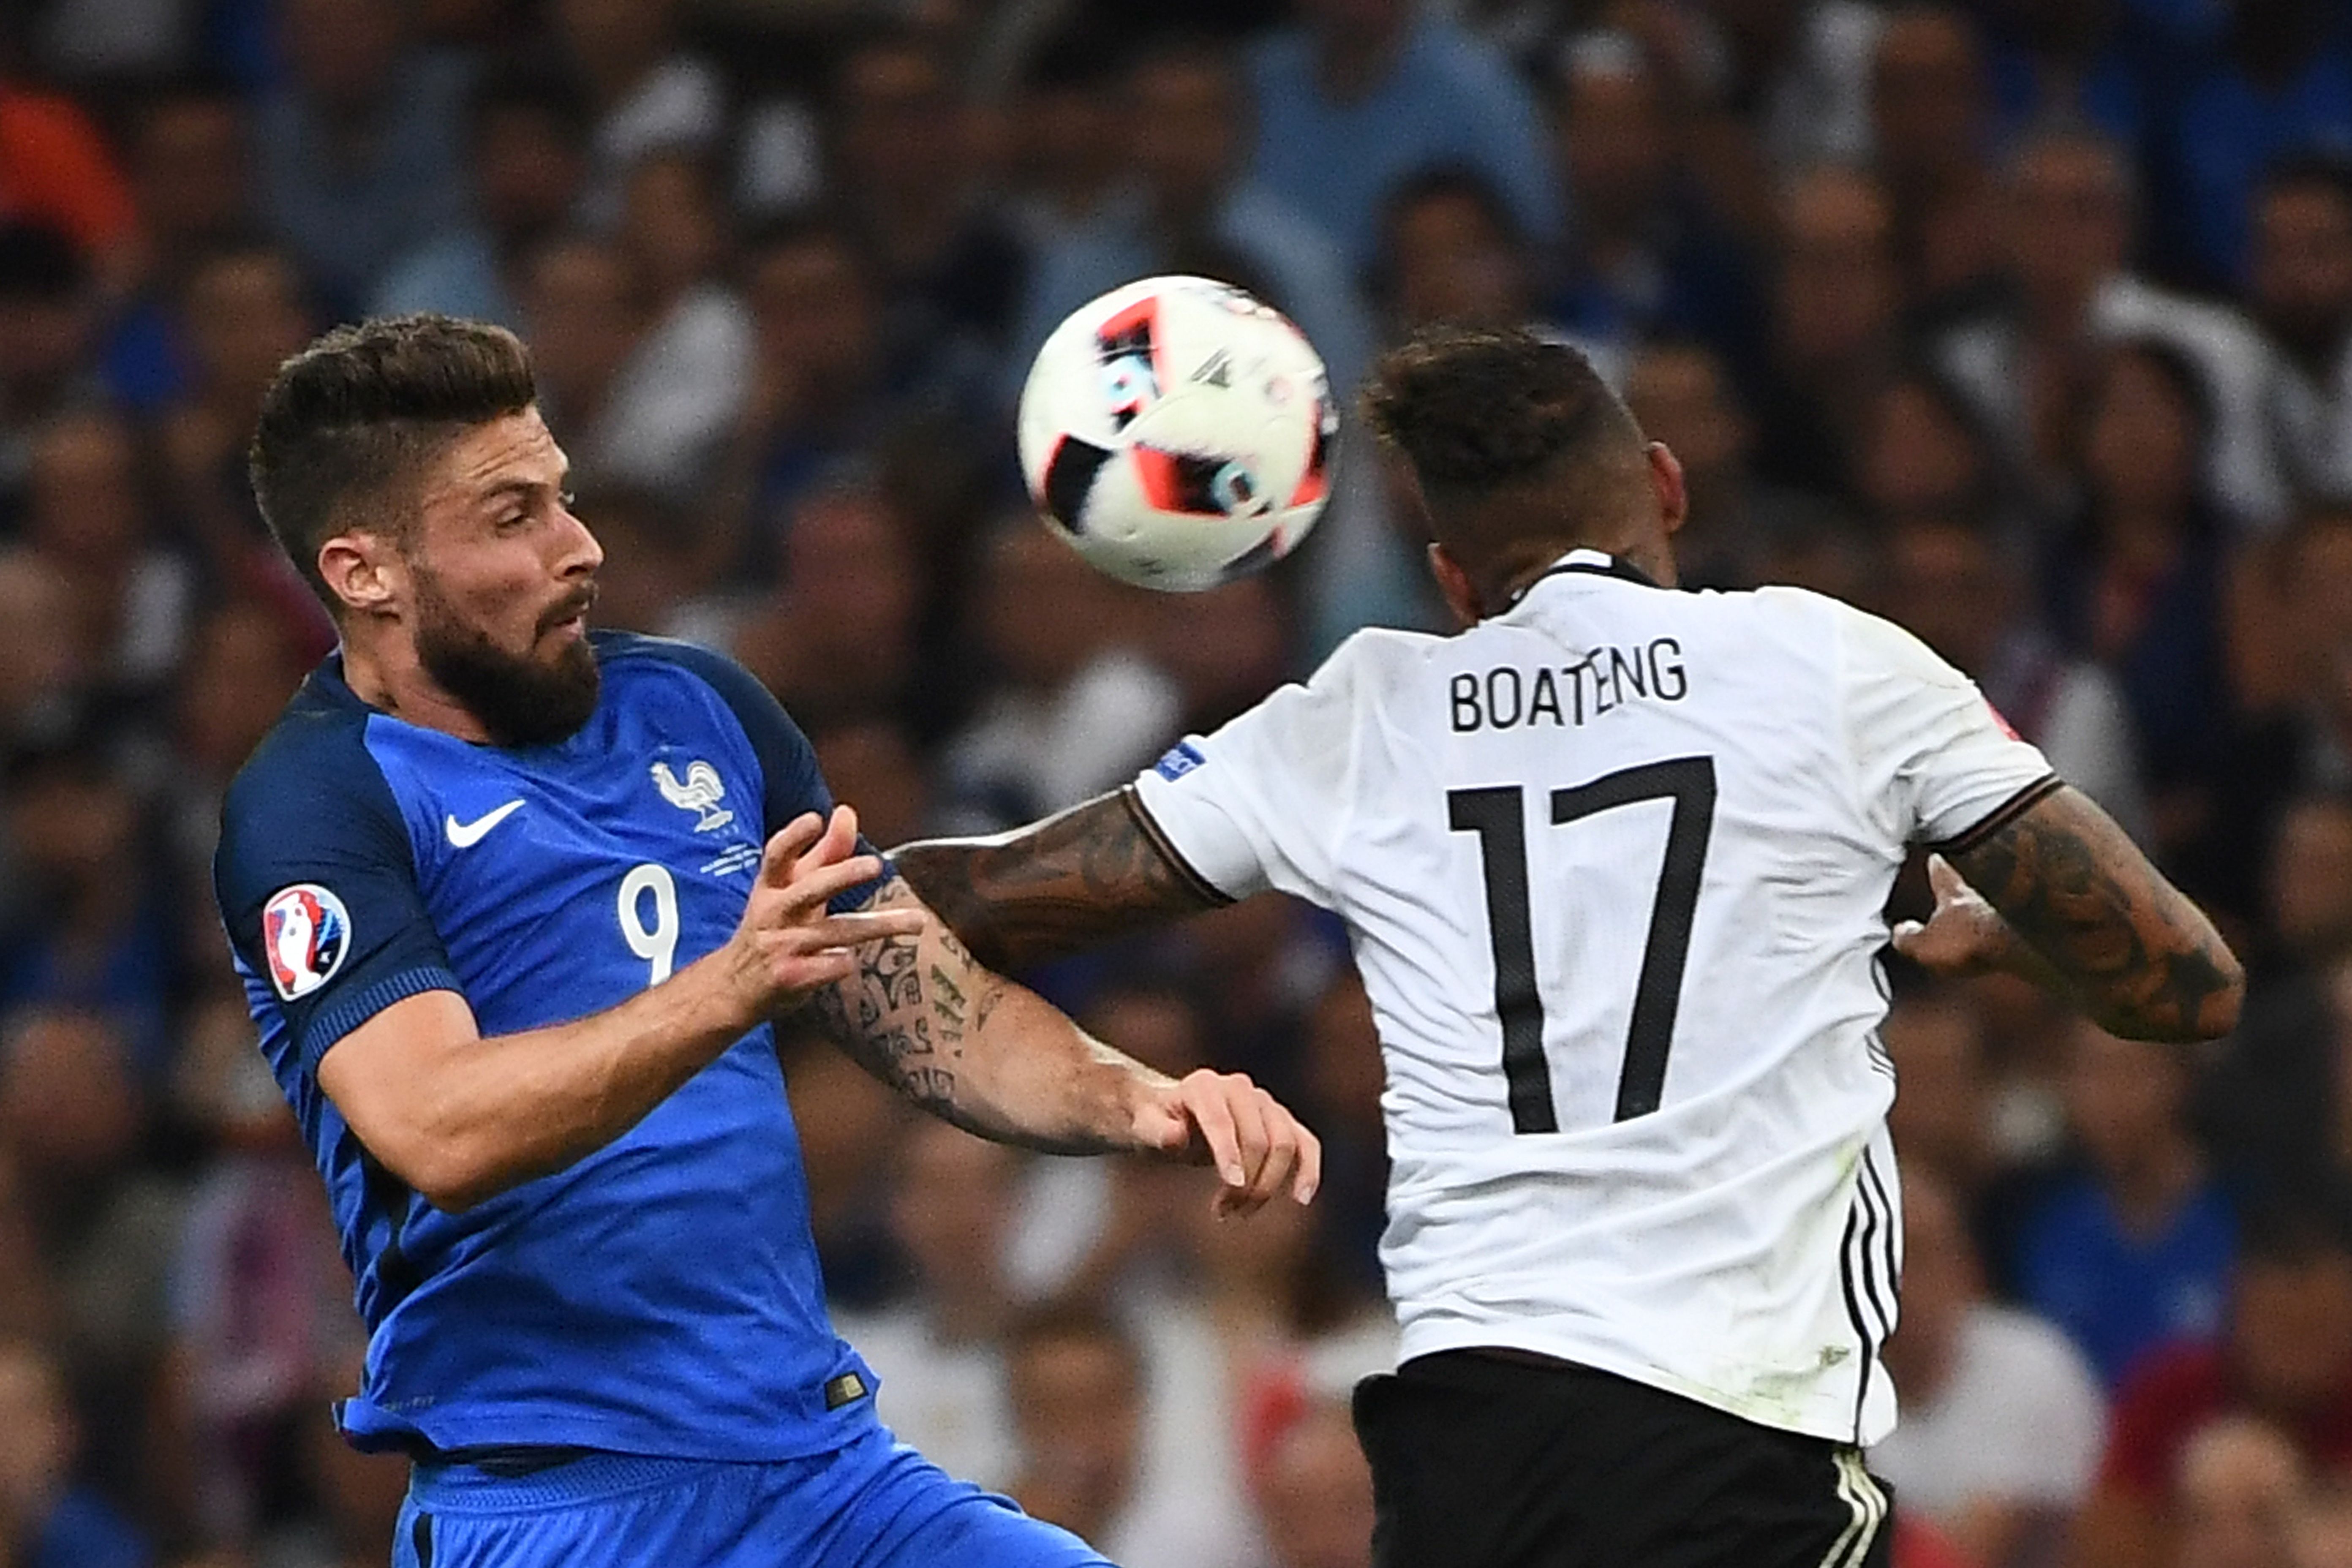 Germany vs. France Highlights Score & Goals at Euro 2016